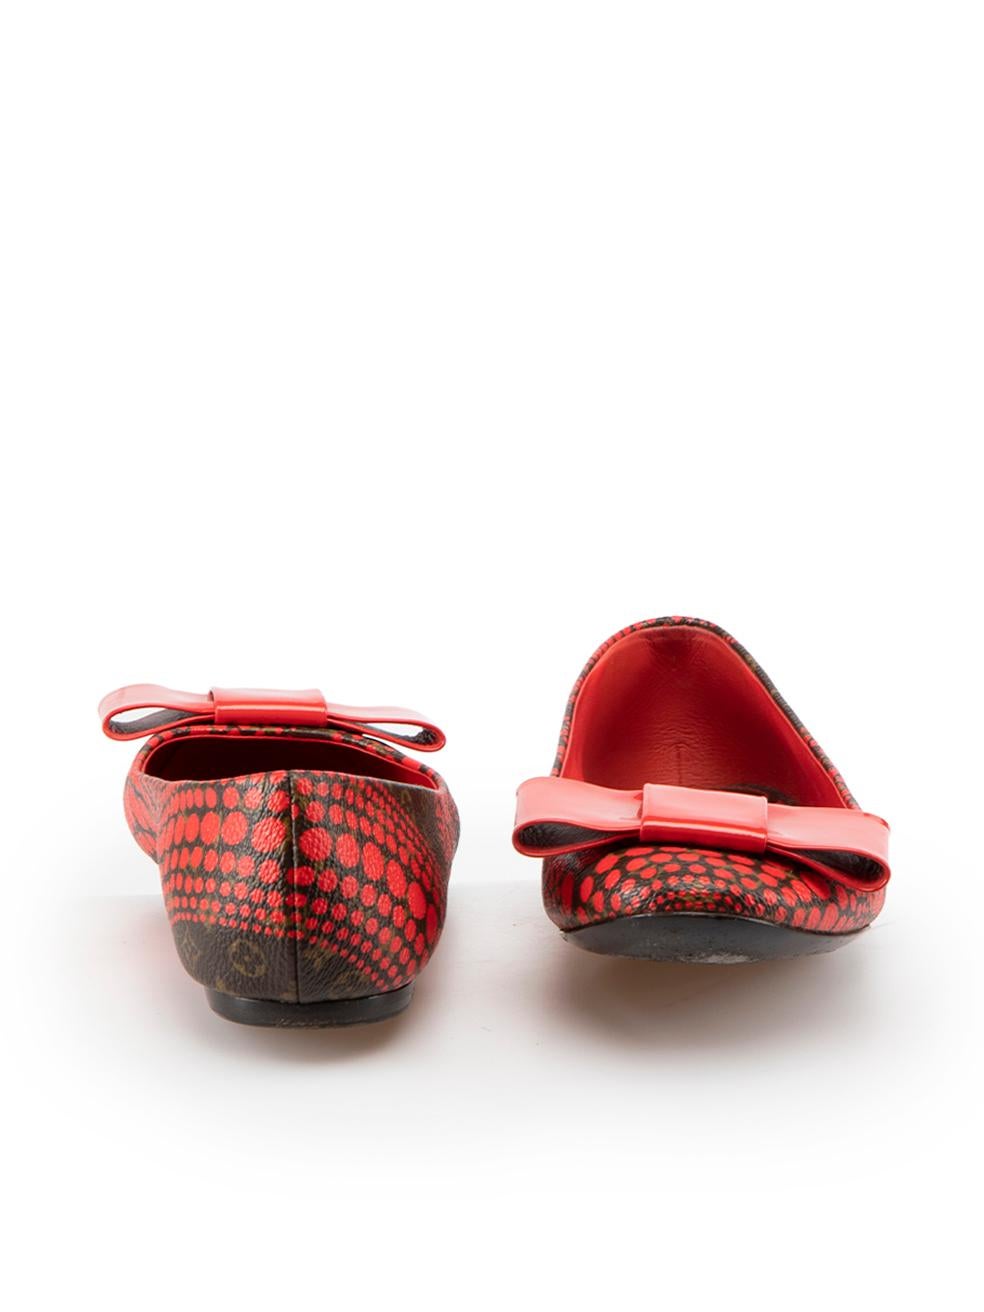 Louis Vuitton x Yayoi Kusama Red Polkadot Ballet Flats Size IT 37.5 In Good Condition For Sale In London, GB